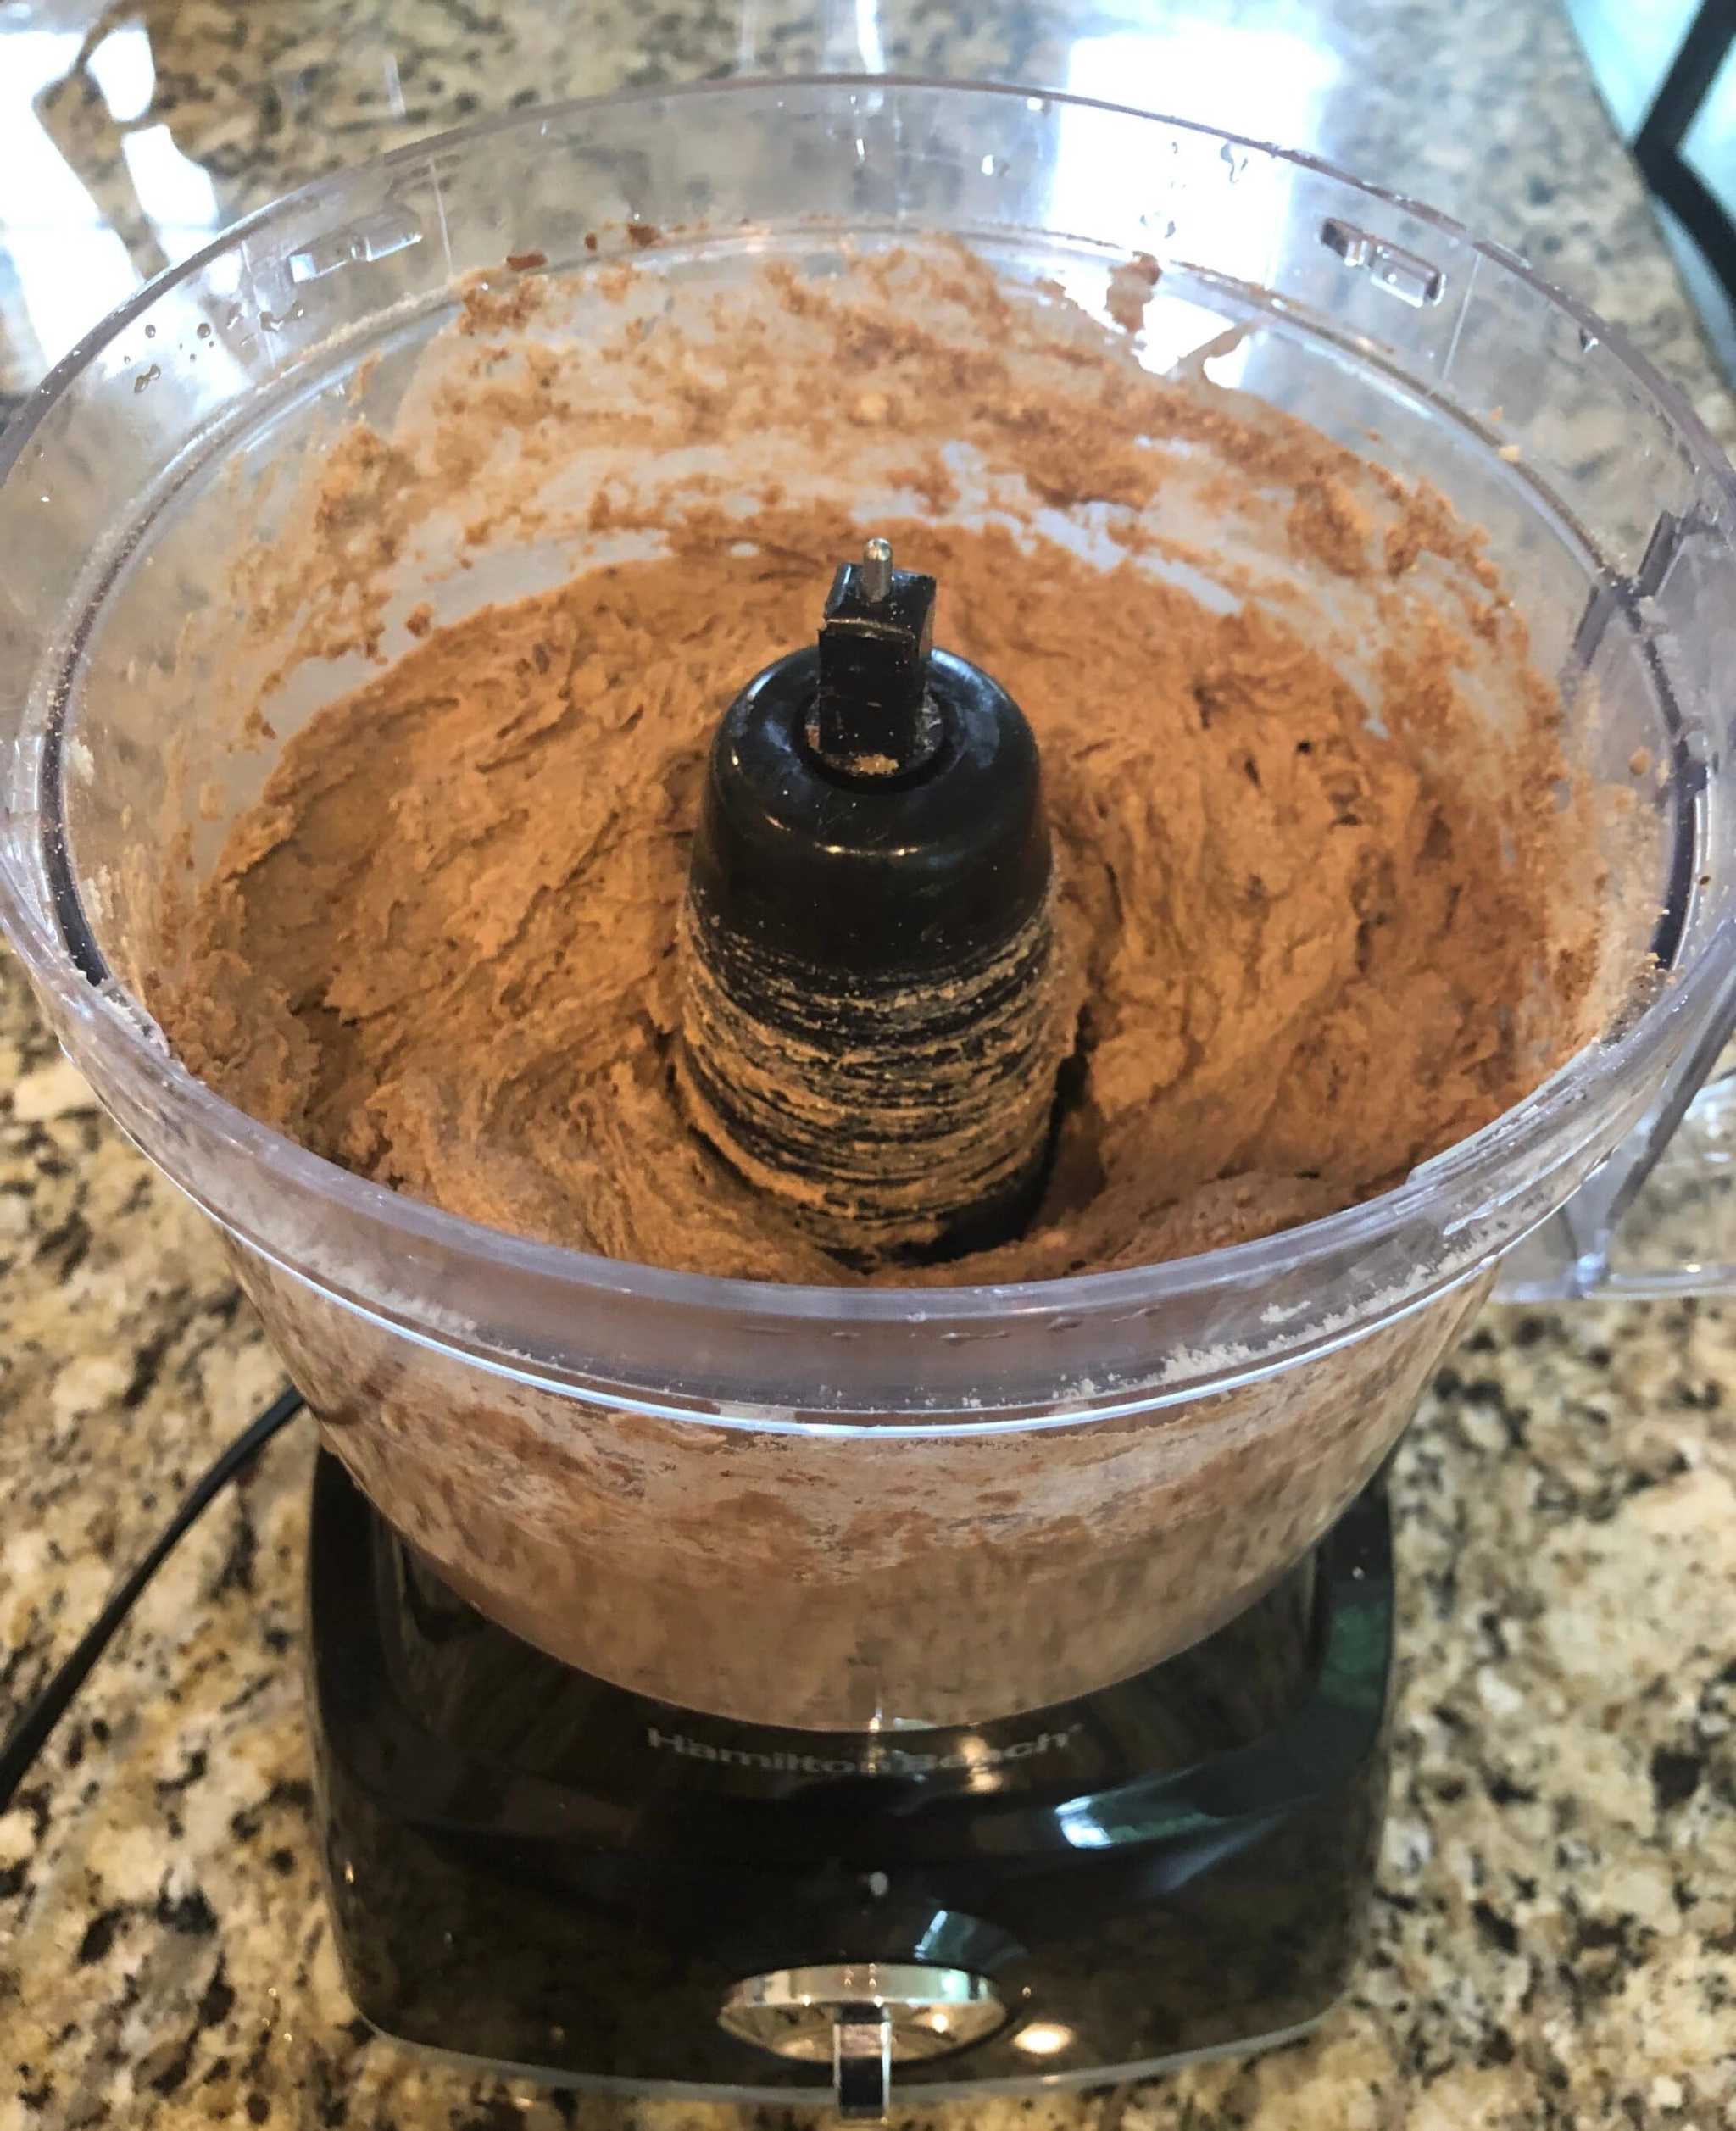 Muffin batter in mixer